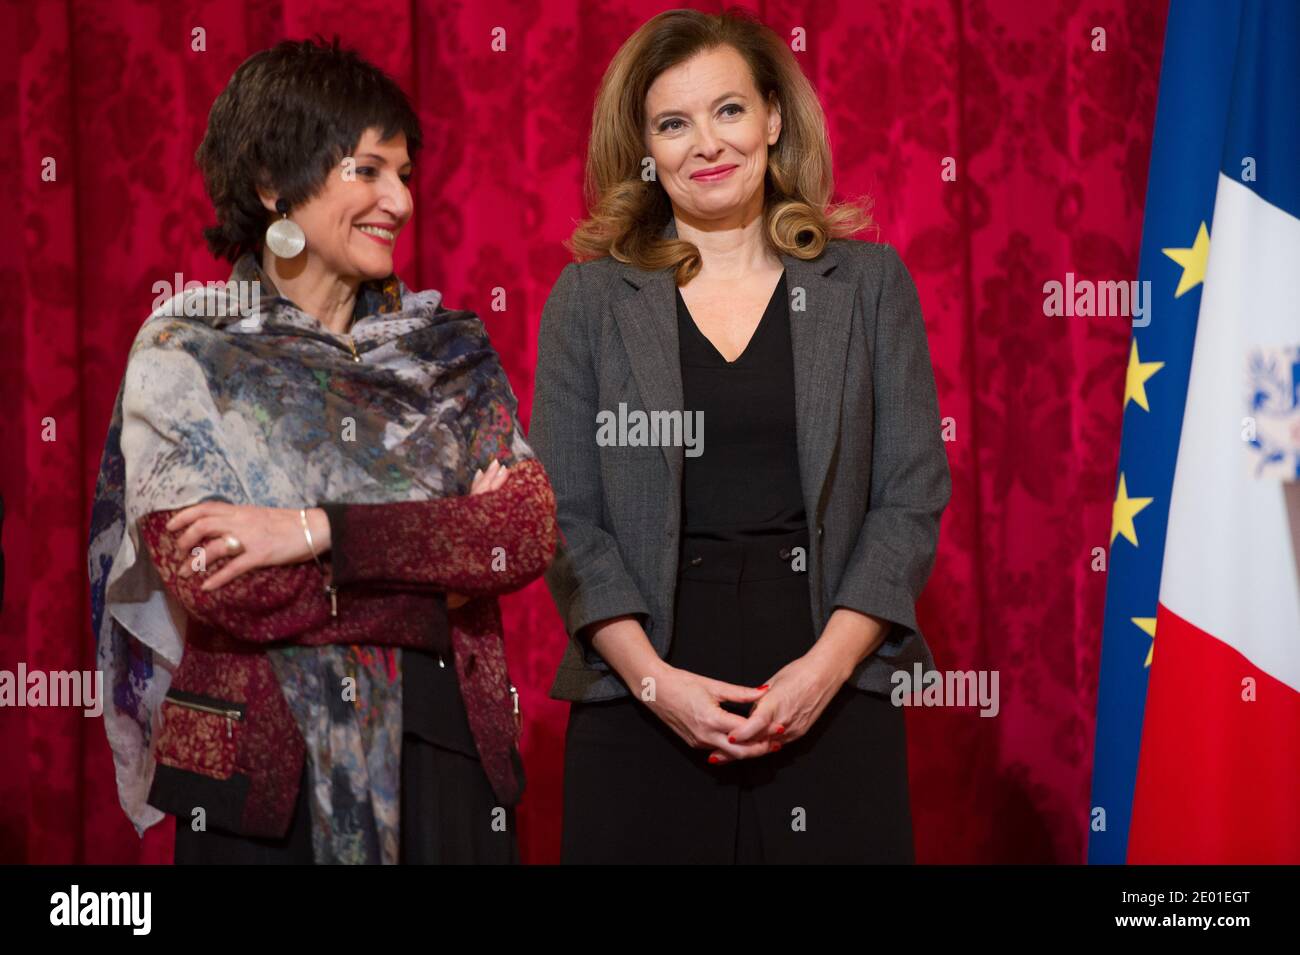 French President Francois Hollande's companion Valerie Trierweiler and Junior Minister for the Disabled Marie-Arlette Carlotti during the annual awarding ceremony of La Medaille de la Famille Francaise (Medal of the French Family), at the Elysee Palace in Paris, France on November 30, 2013. The award is to honour those who have successfully raised several children with dignity. Photo by Nicolas Gouhier/ABACAPRESS.COM Stock Photo